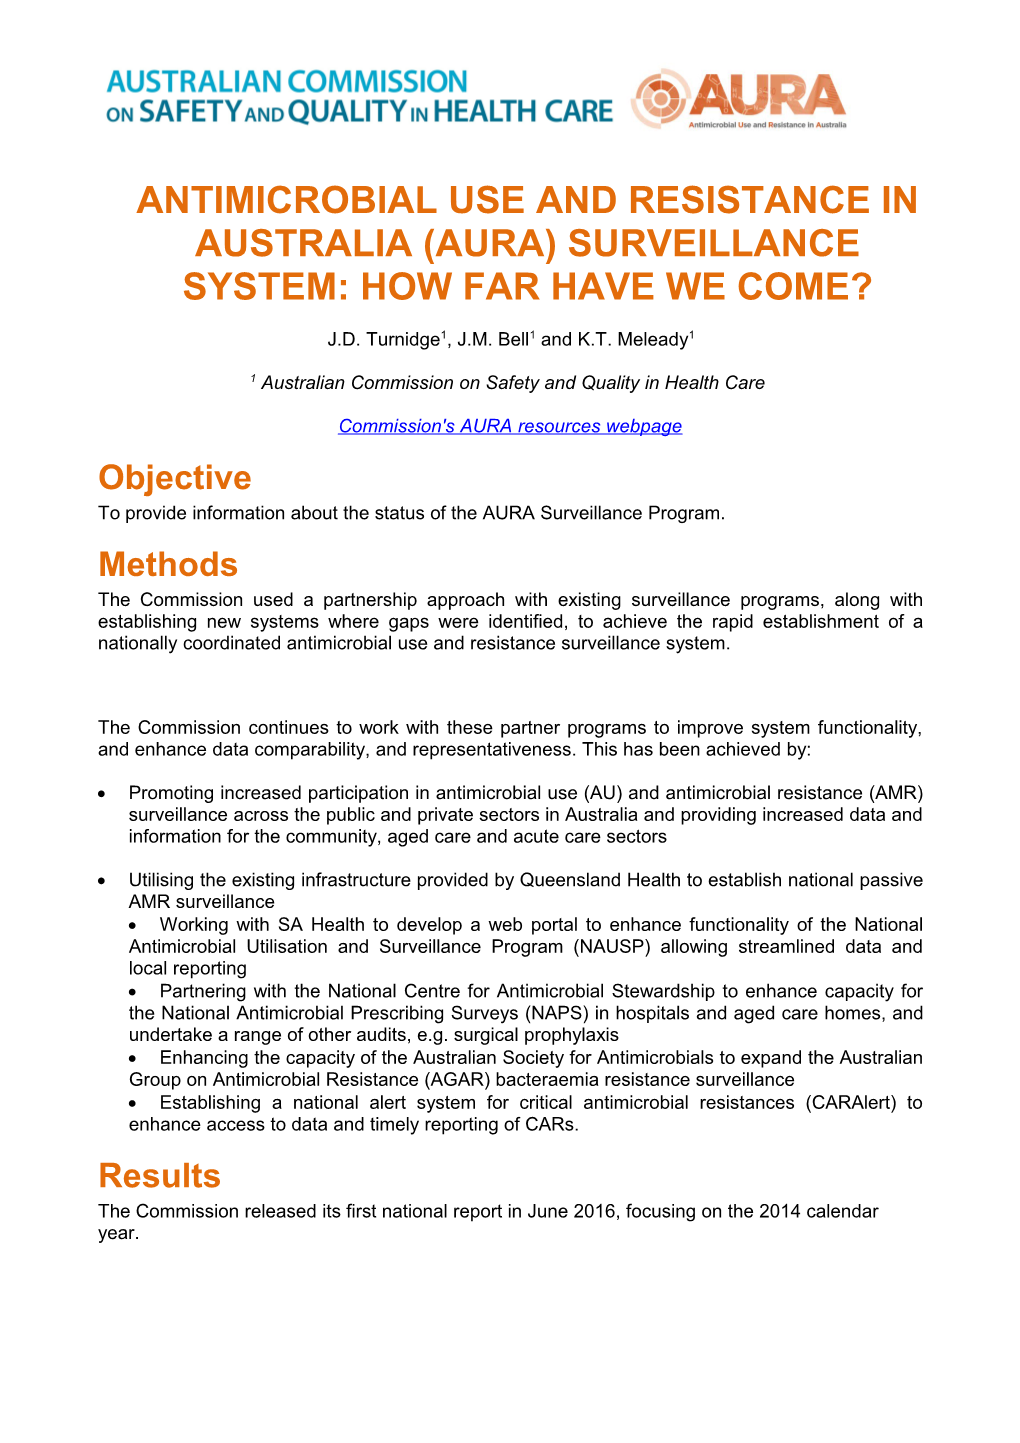 Antimicrobial Use and Resistance in Australia (Aura) Surveillance System: How Far Have